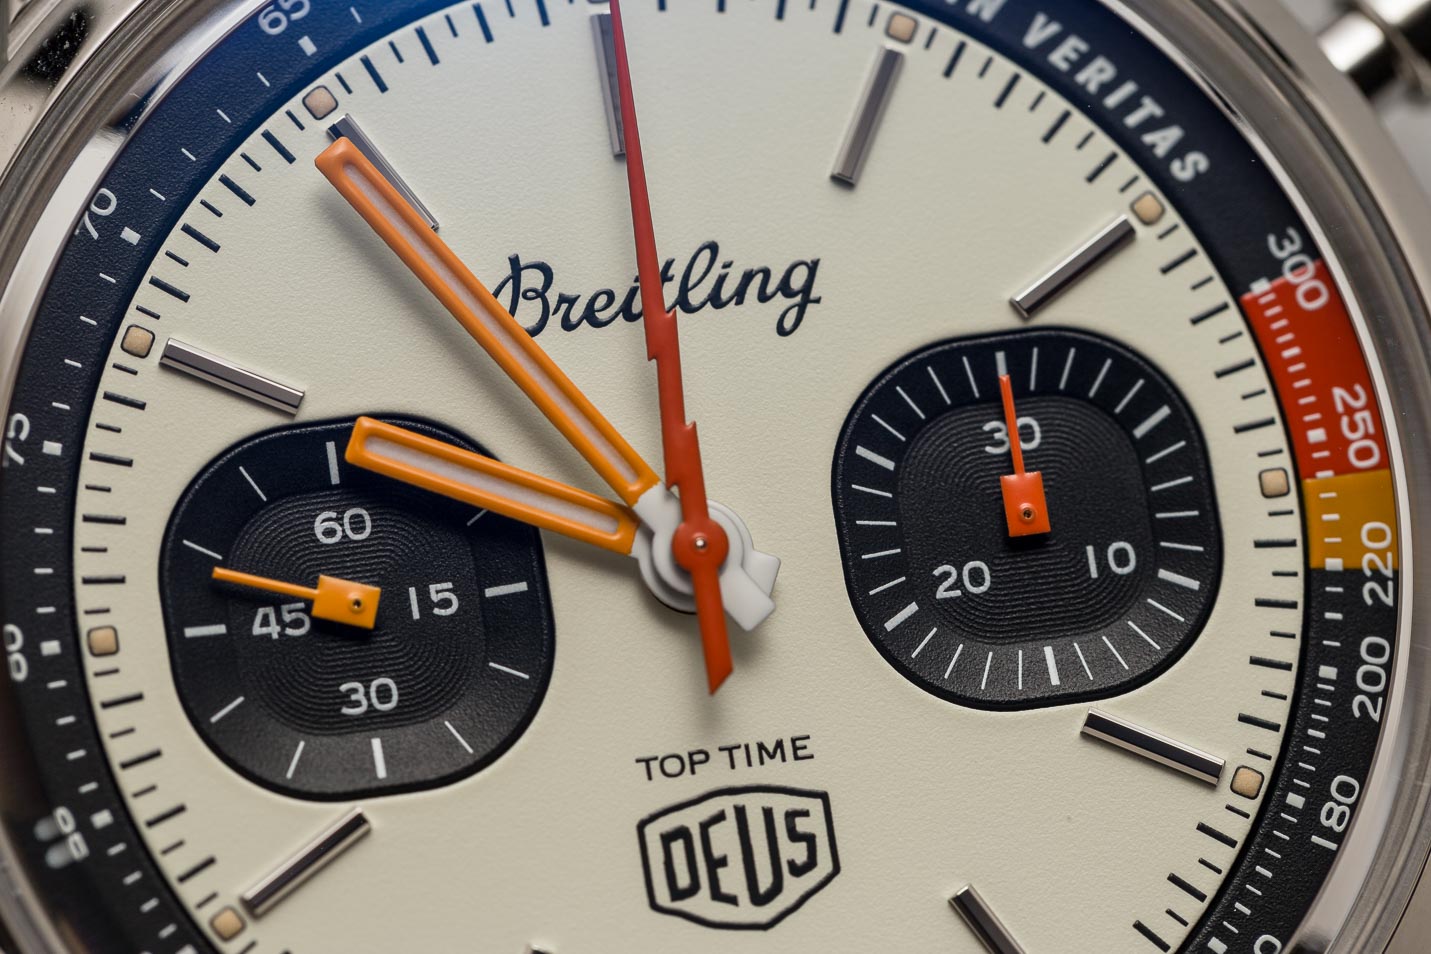 News: Presenting the Breitling Top Time Deus Chronograph Limited Edition —  WATCH COLLECTING LIFESTYLE